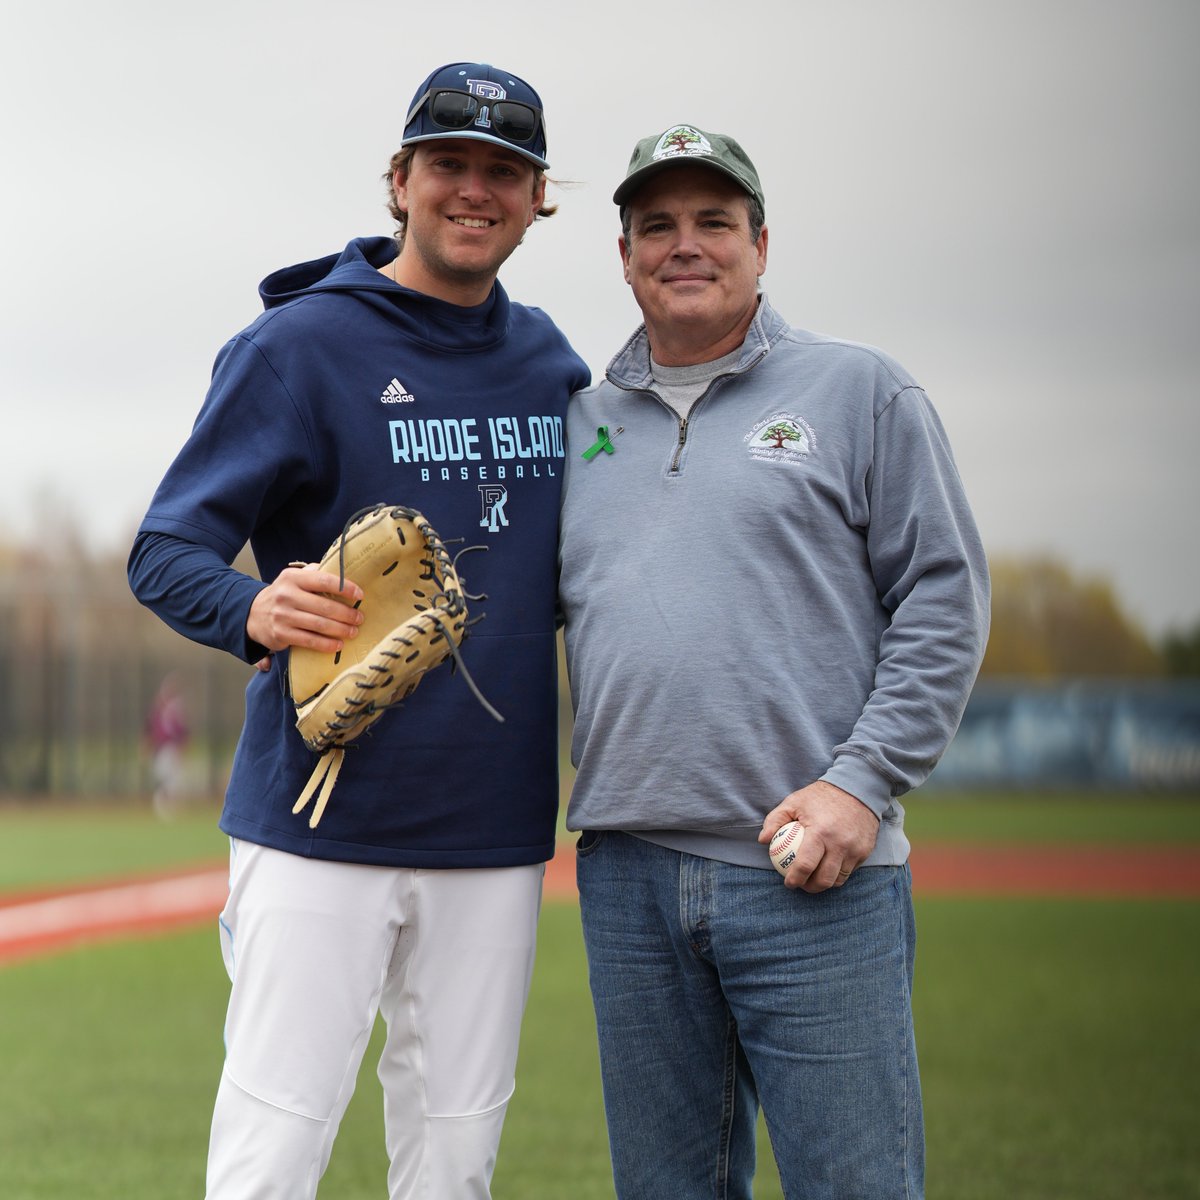 It was an honor to have Mark Collins from the Chris Collins Foundation throw out the first pitch at today's game 💚 For more information about this amazing organization, please visit chriscollinsfoundation.org